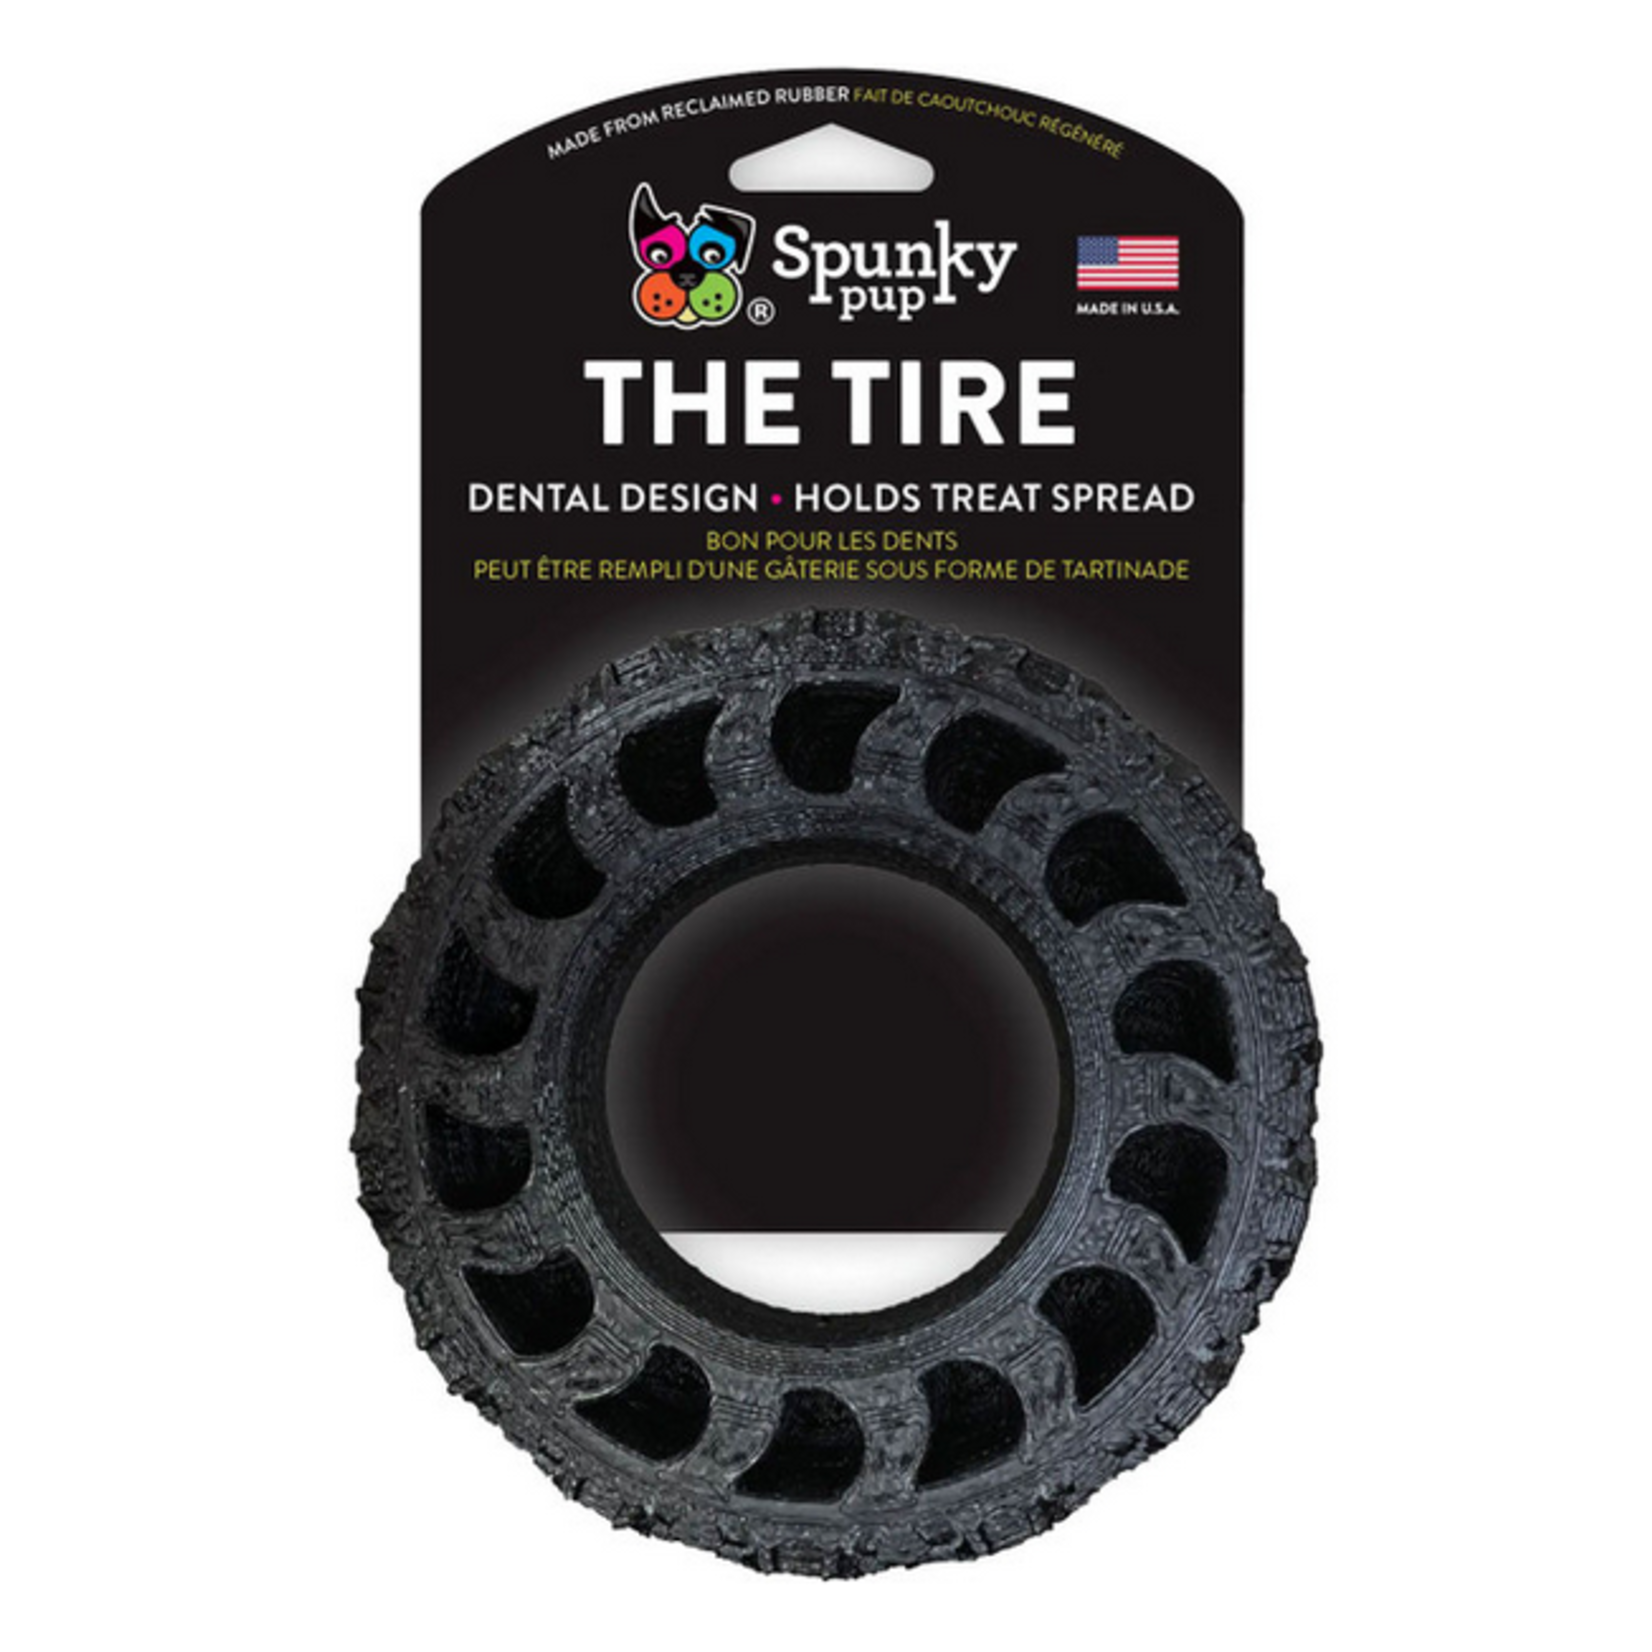 Spunky Pup Spunky Pup The Tire - Reclaimed Rubber Toy - MADE IN THE USA | Large